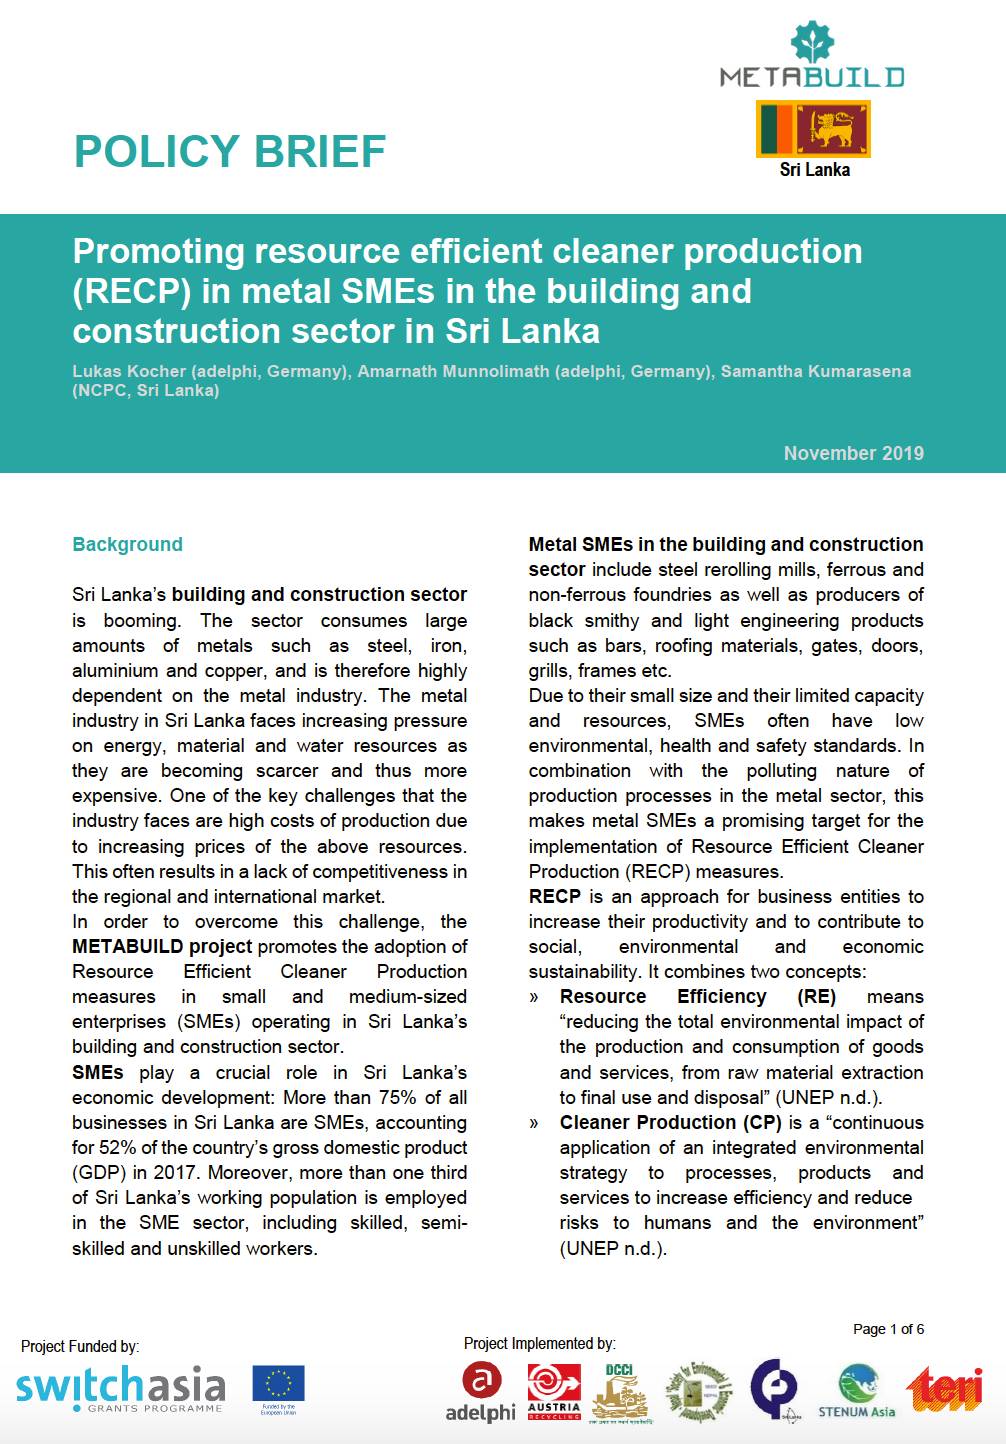 Promoting resource efficient cleaner production (RECP) in metal SMEs in the building and construction sector in Sri Lanka